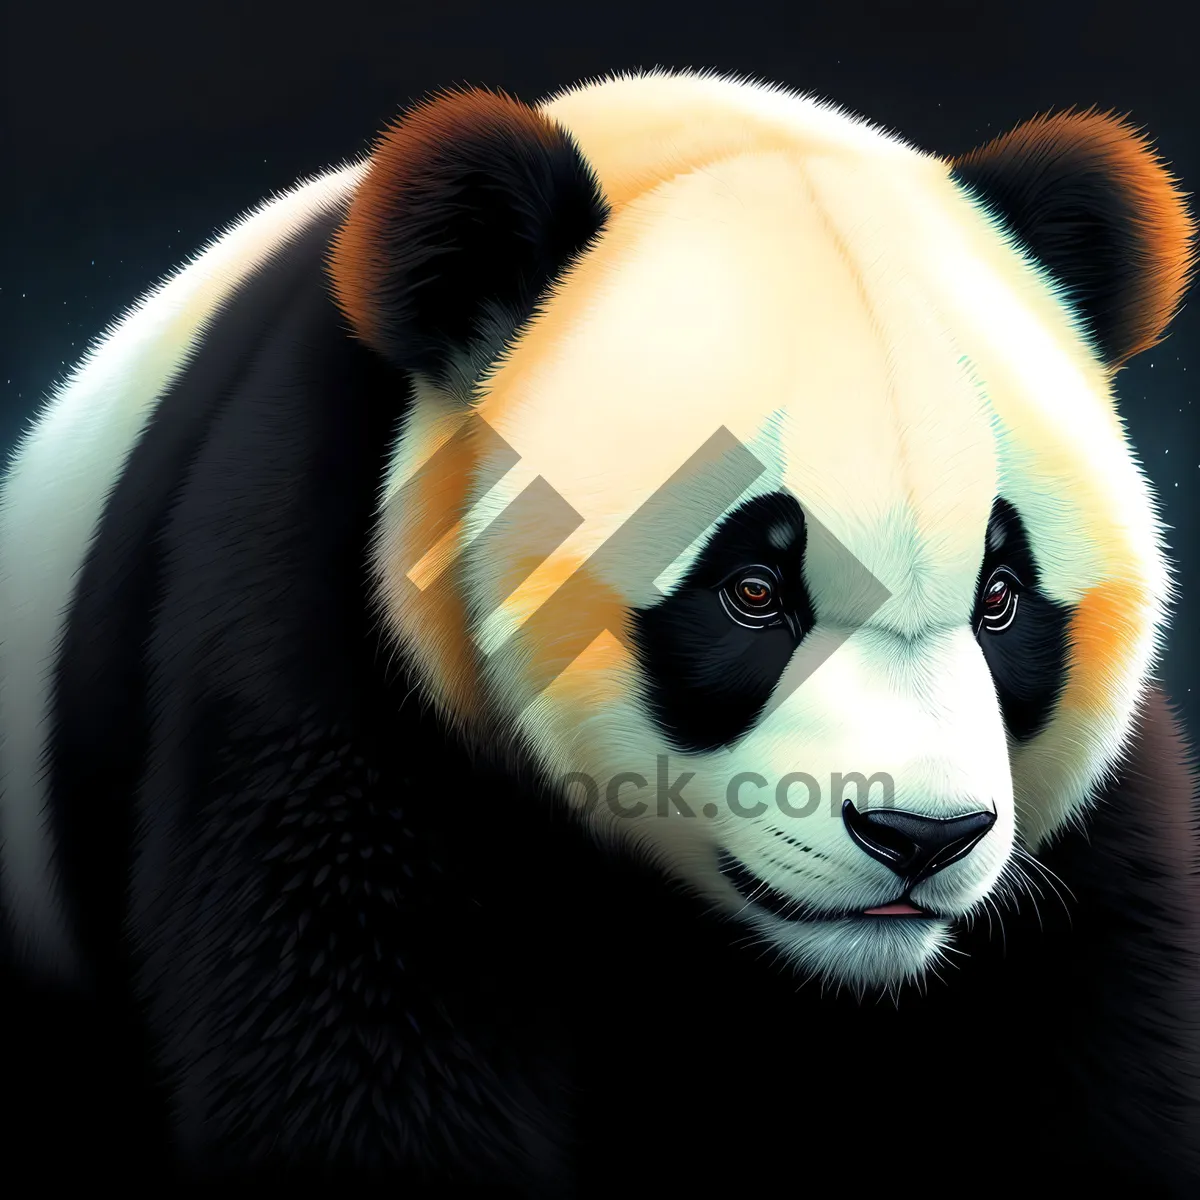 Picture of Adorable Giant Panda with Piercing Black Eyes